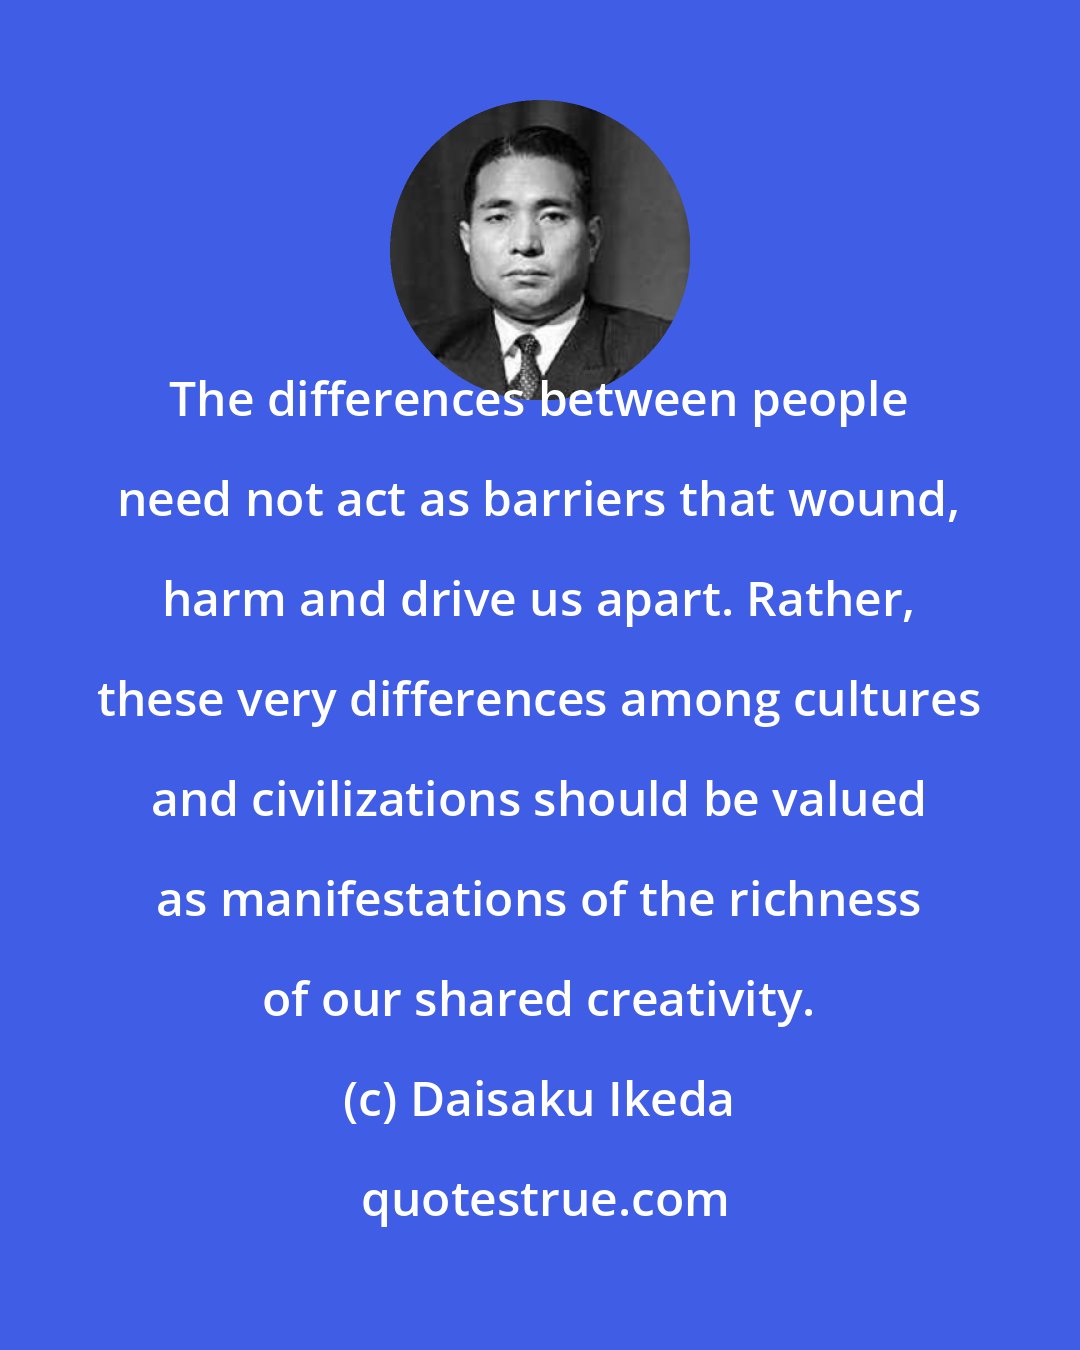 Daisaku Ikeda: The differences between people need not act as barriers that wound, harm and drive us apart. Rather, these very differences among cultures and civilizations should be valued as manifestations of the richness of our shared creativity.